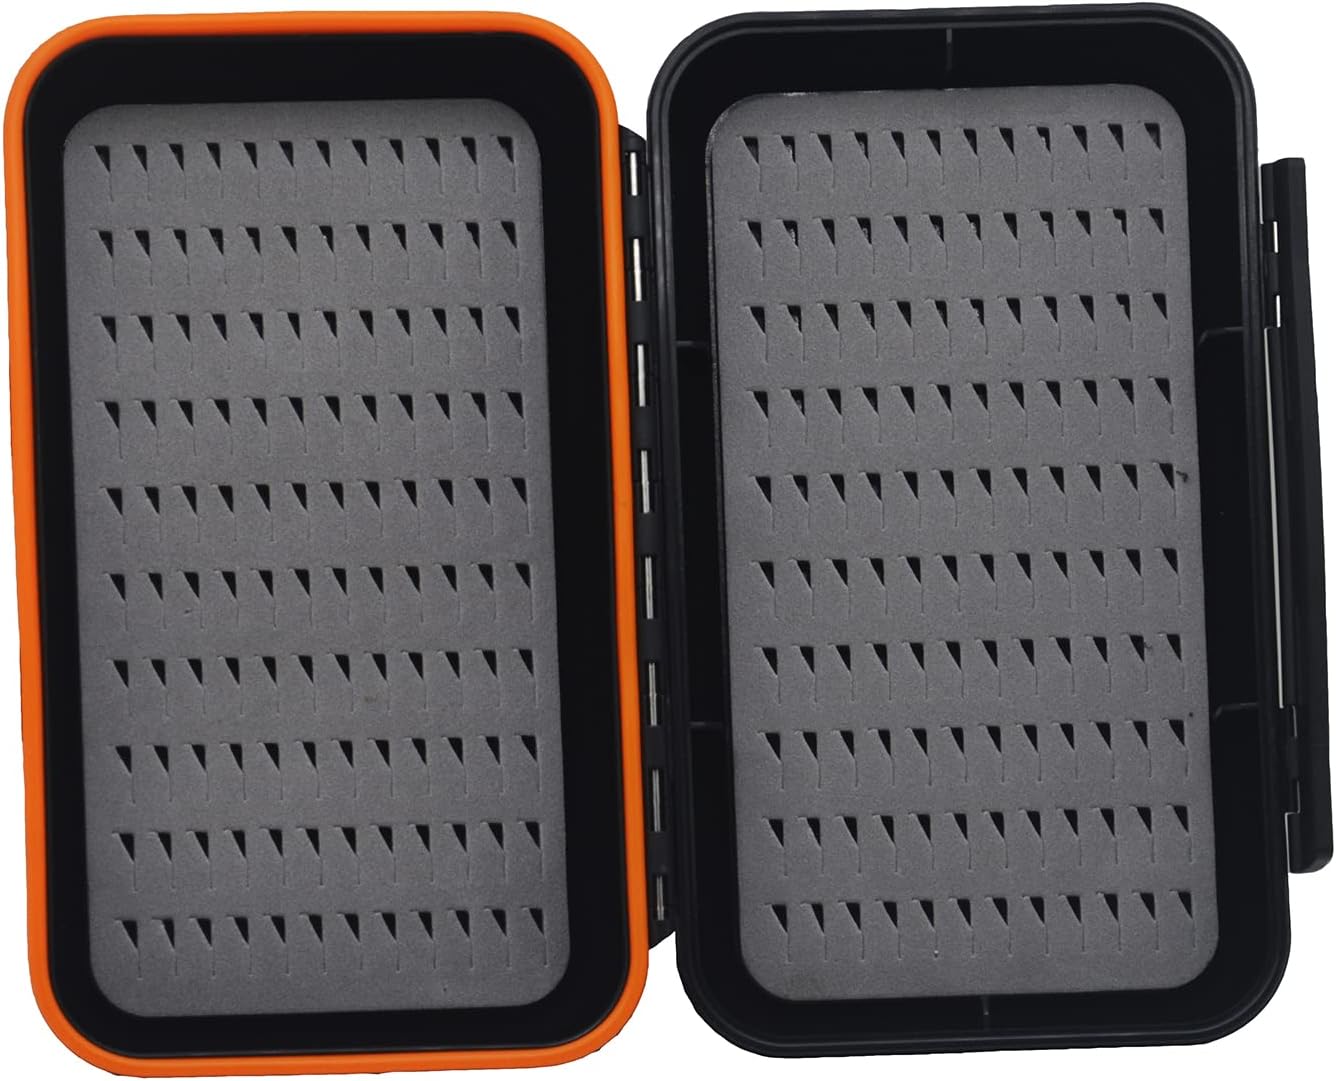 Fly Cases WholeSale - Price List, Bulk Buy at